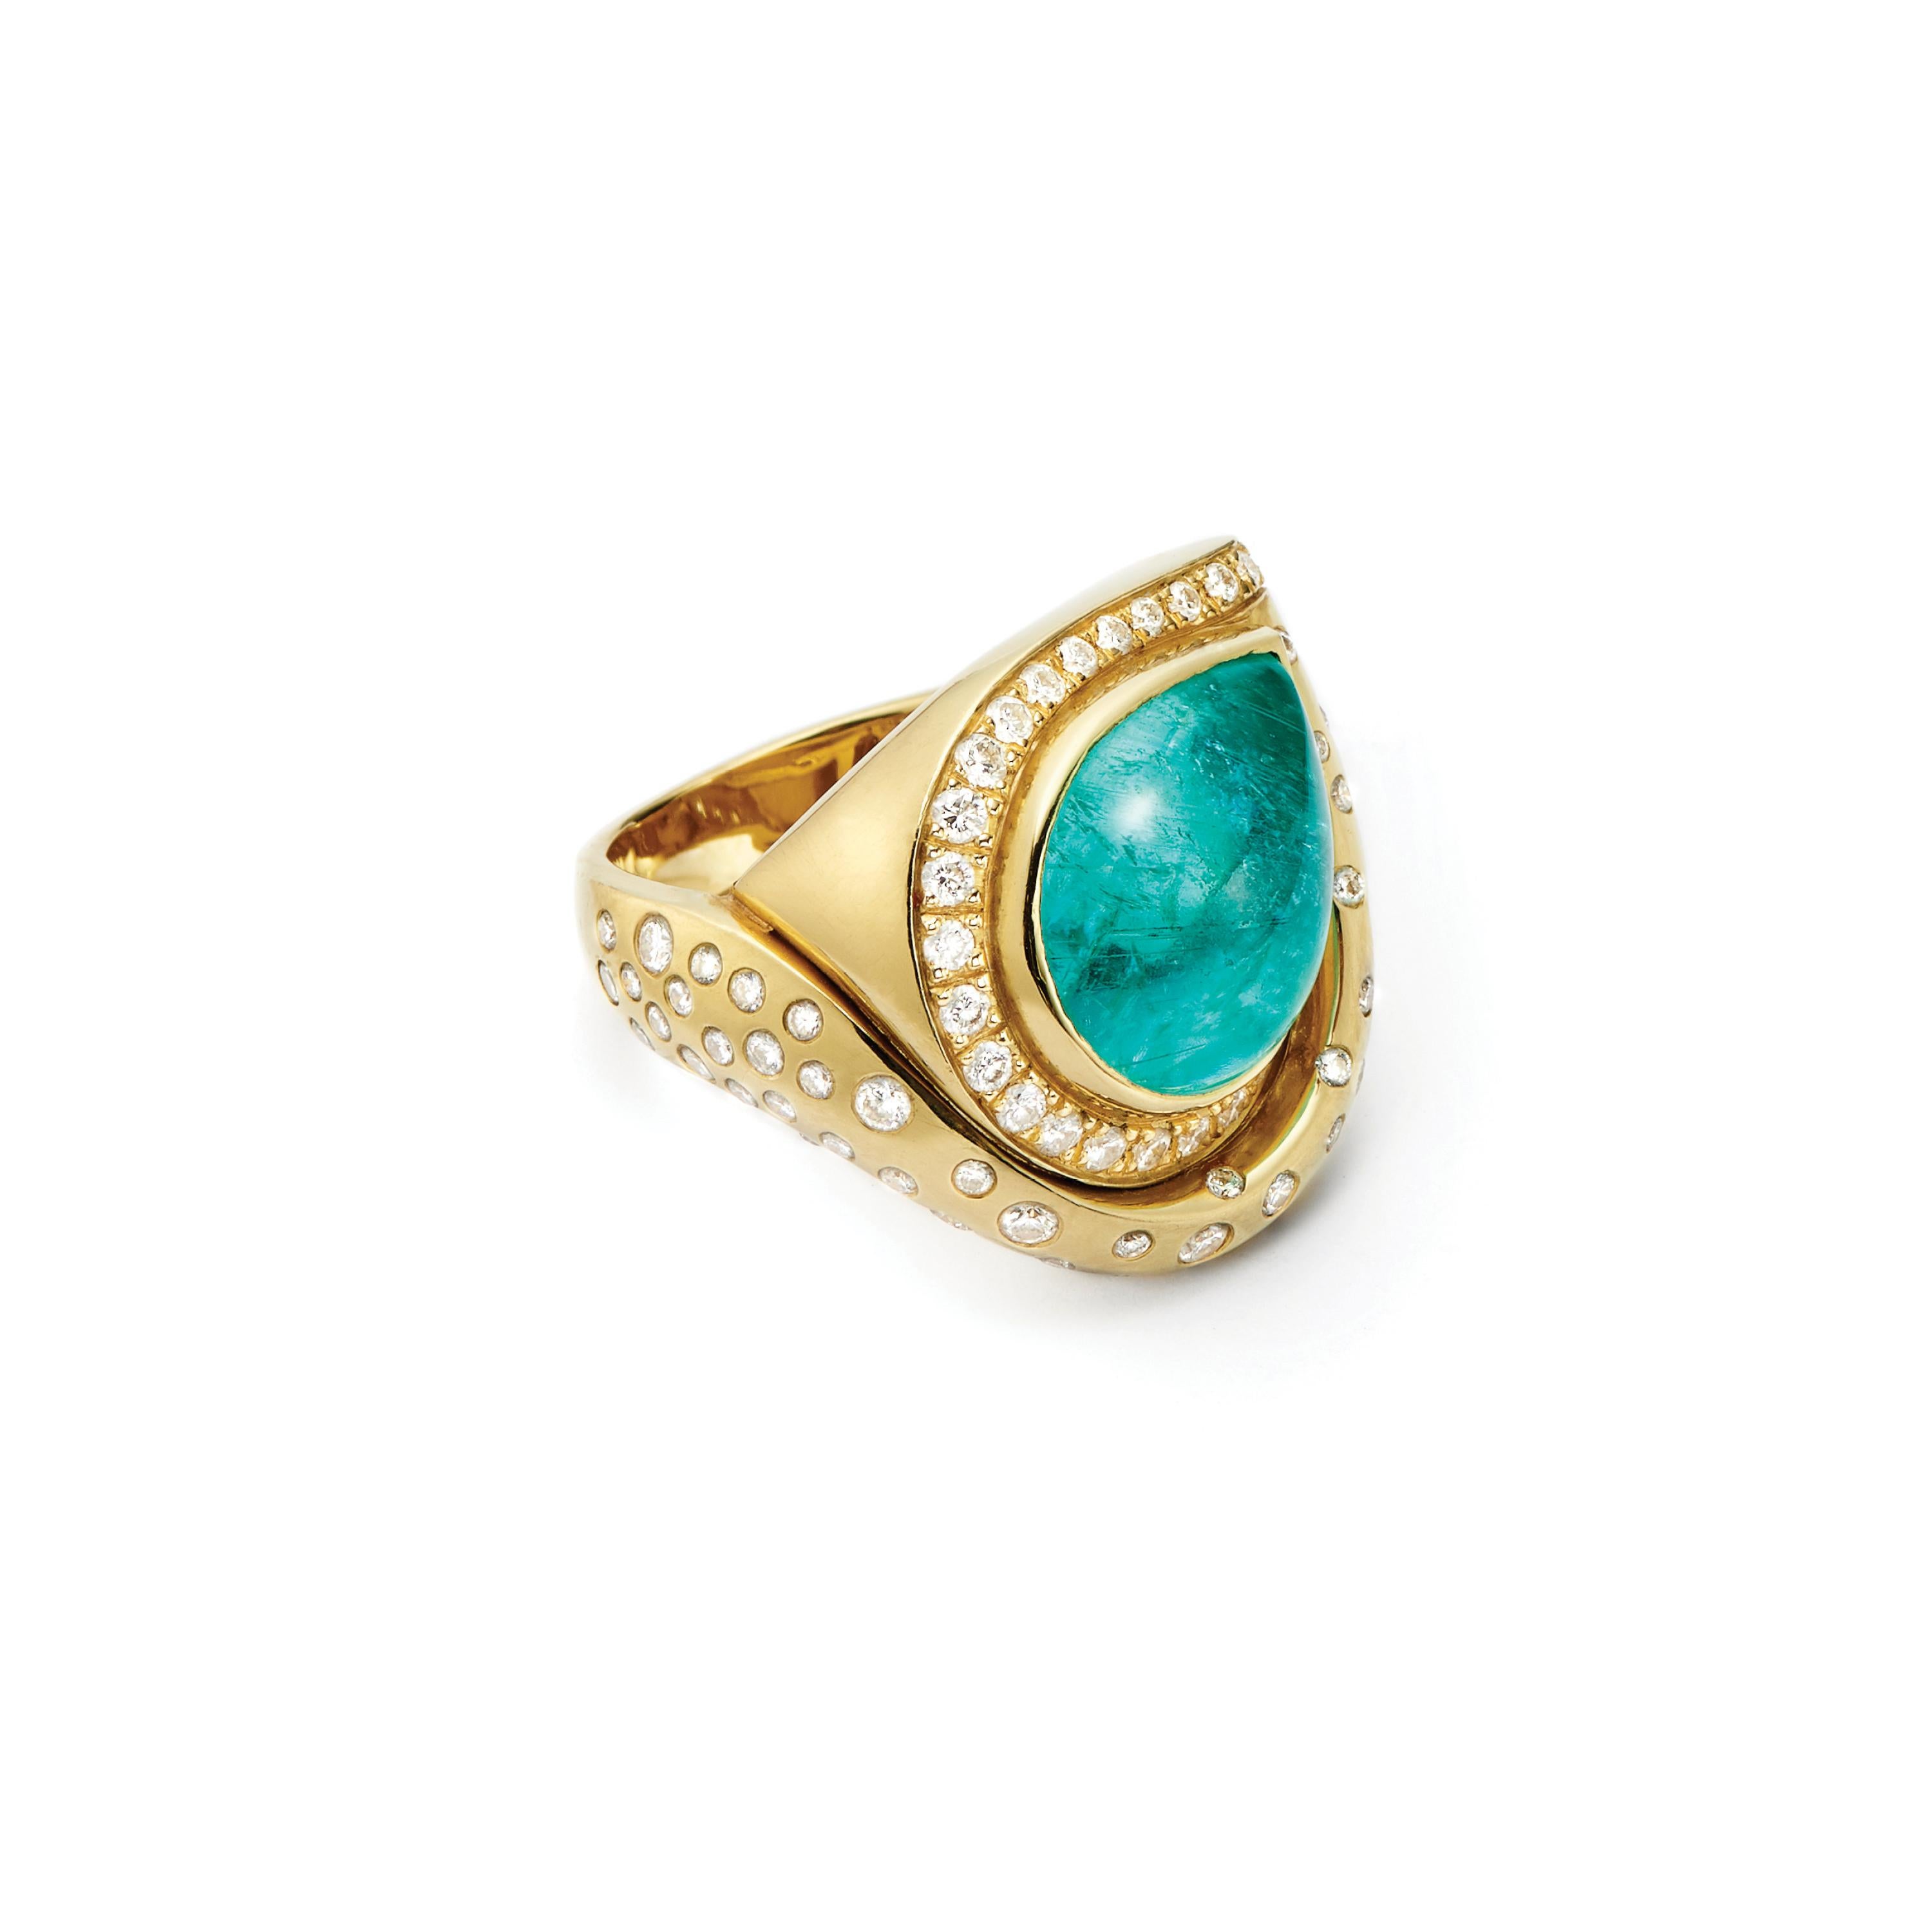 An exquisite and rare 12 Carat Pear-Shaped Cabochon Paraiba Tourmaline (Mozambique) is surrounded by over a carat of brilliant cut Diamonds in a breathtaking swirl design. Set in 18 Karat Gold.

Diamonds: 1.57 Carat FG SI
Paraiba Tourmaline